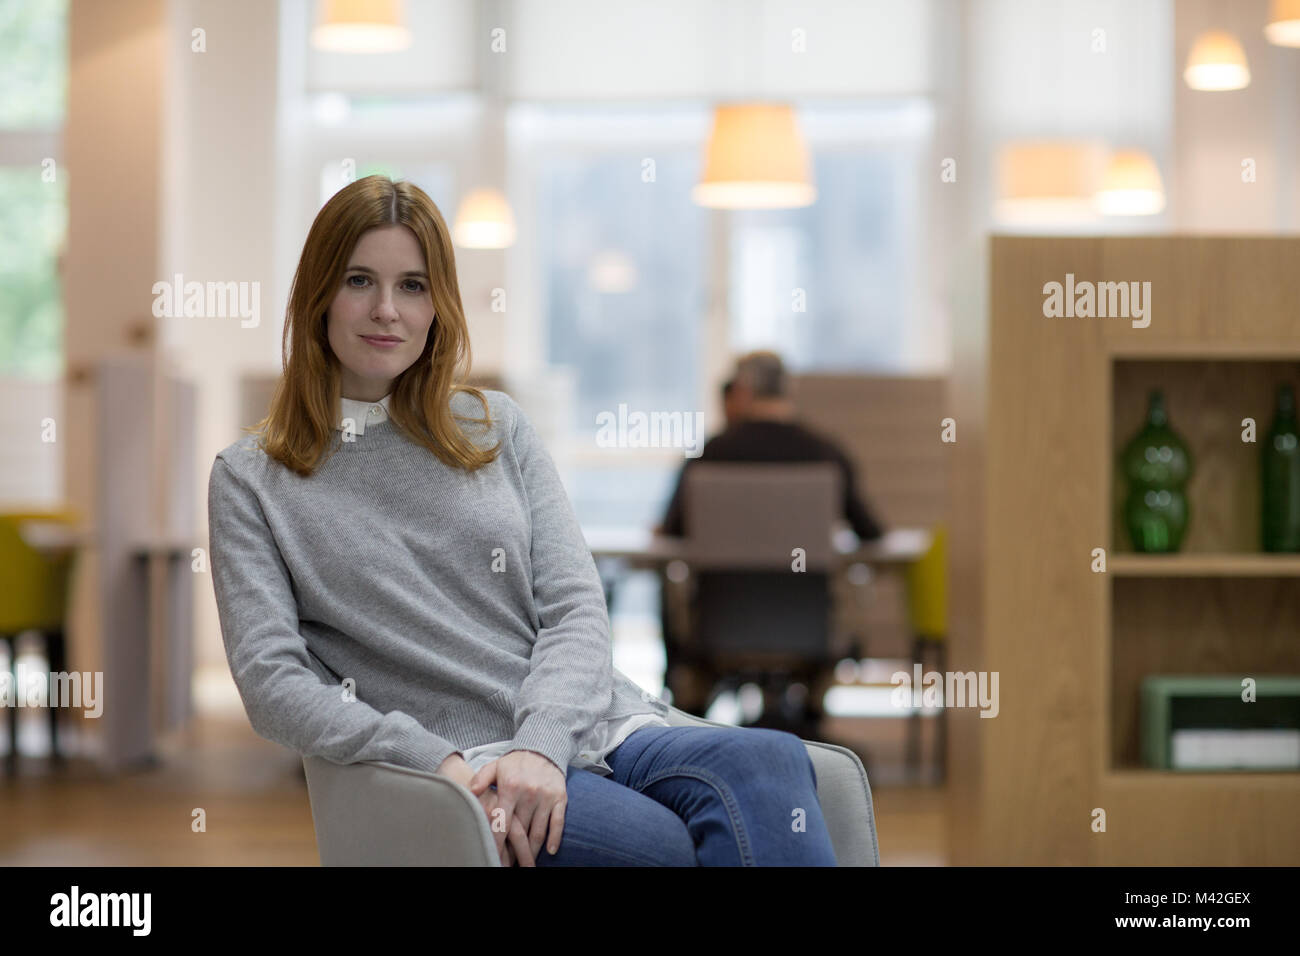 Portrait of female entrepreneur in a modern shared workplace Stock Photo